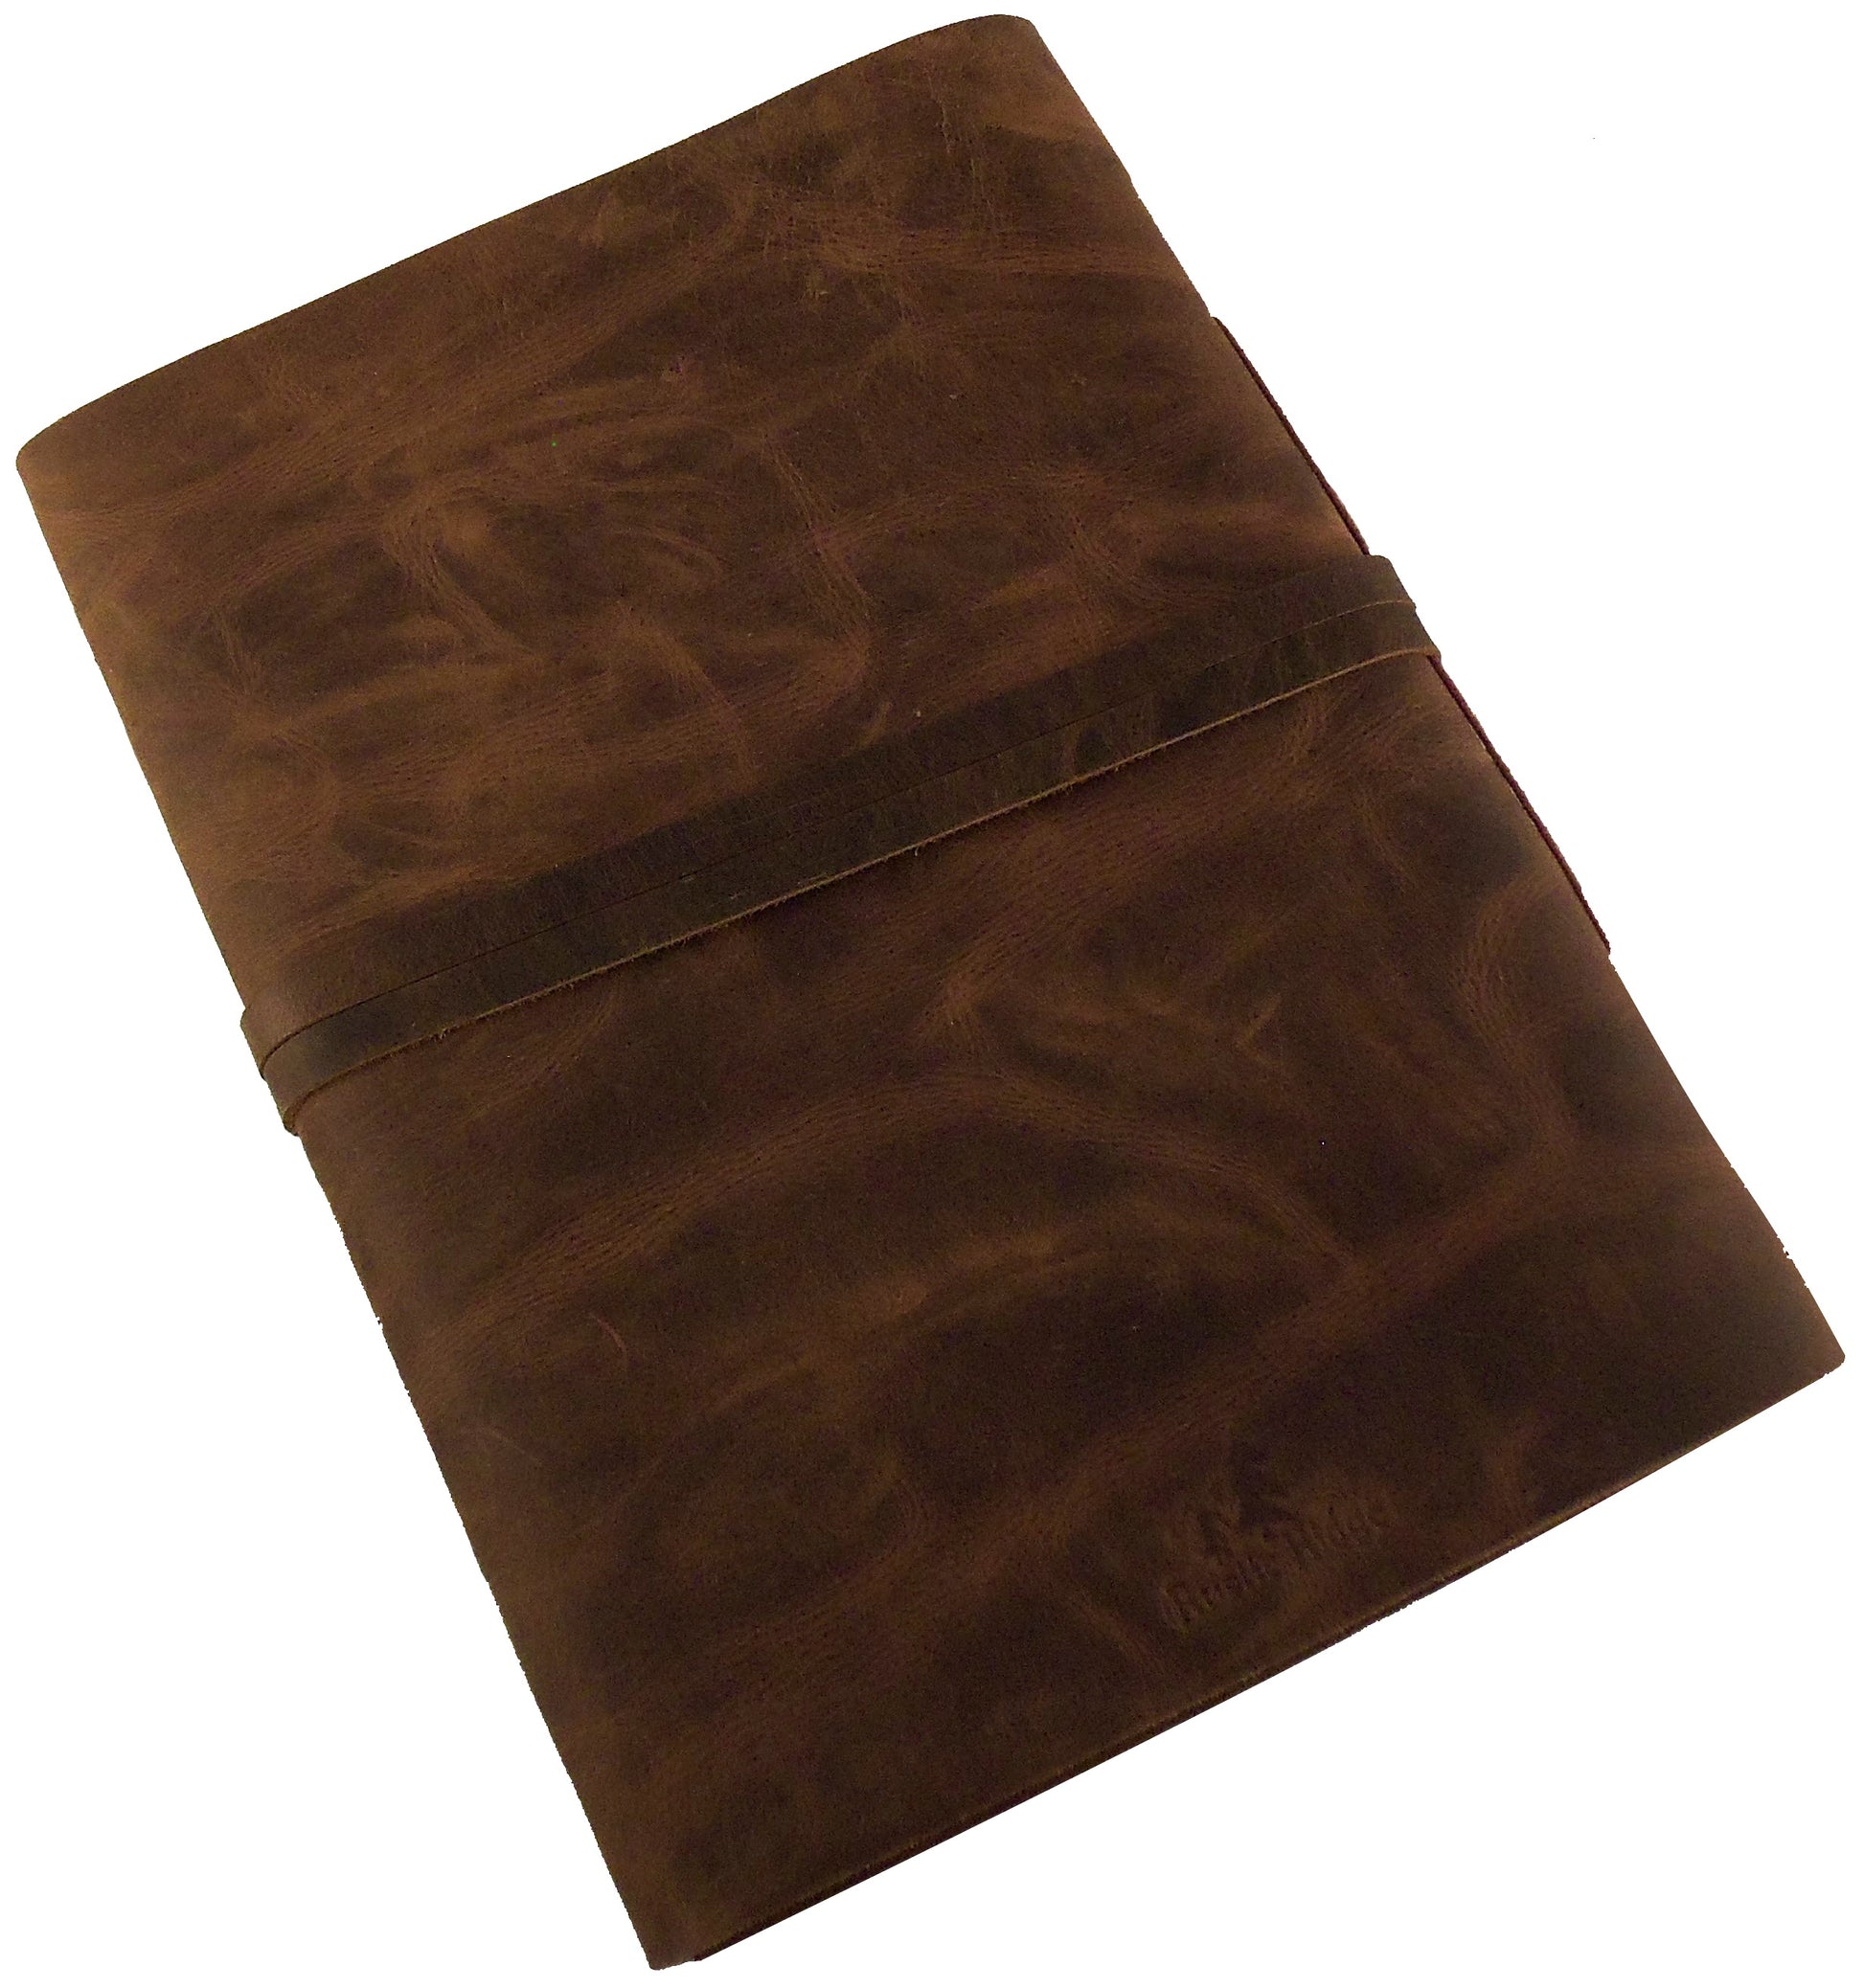 Extra Large Leather Journal to Write In, 8x10 or 9x12 inches, Lined or  Unlined Pages, Huge Jumbo Writing Journal or Sketch book, Handmade in the  USA